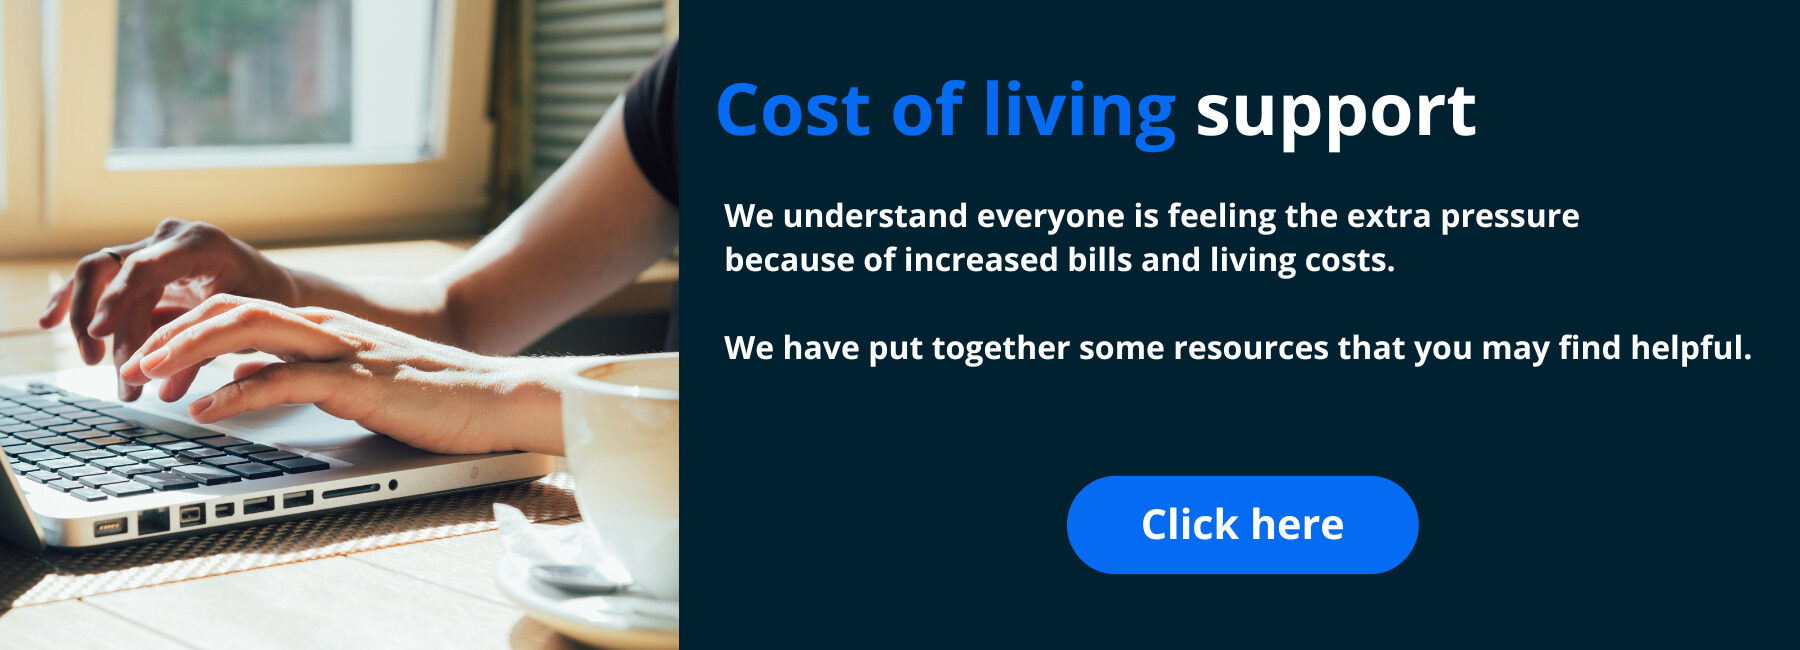 https://www.havebury.com/payments-rent-and-service-charges/cost-of-living-support/